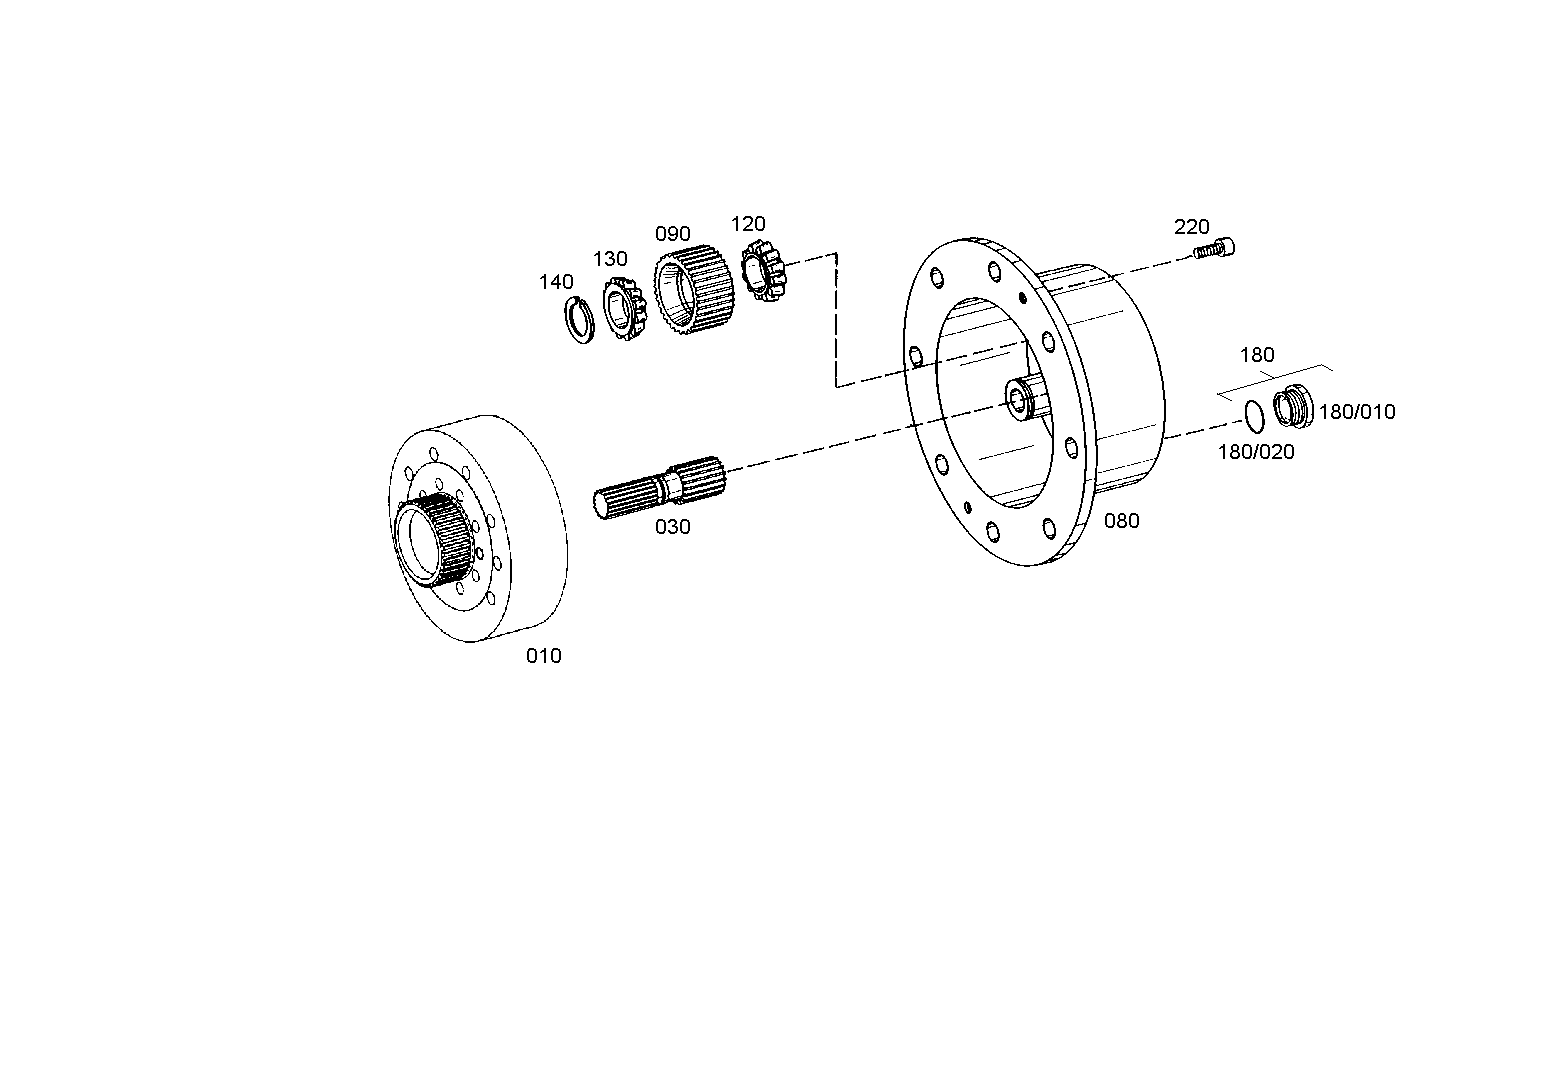 drawing for AGCO F514300020380 - PLANET CARRIER (figure 1)